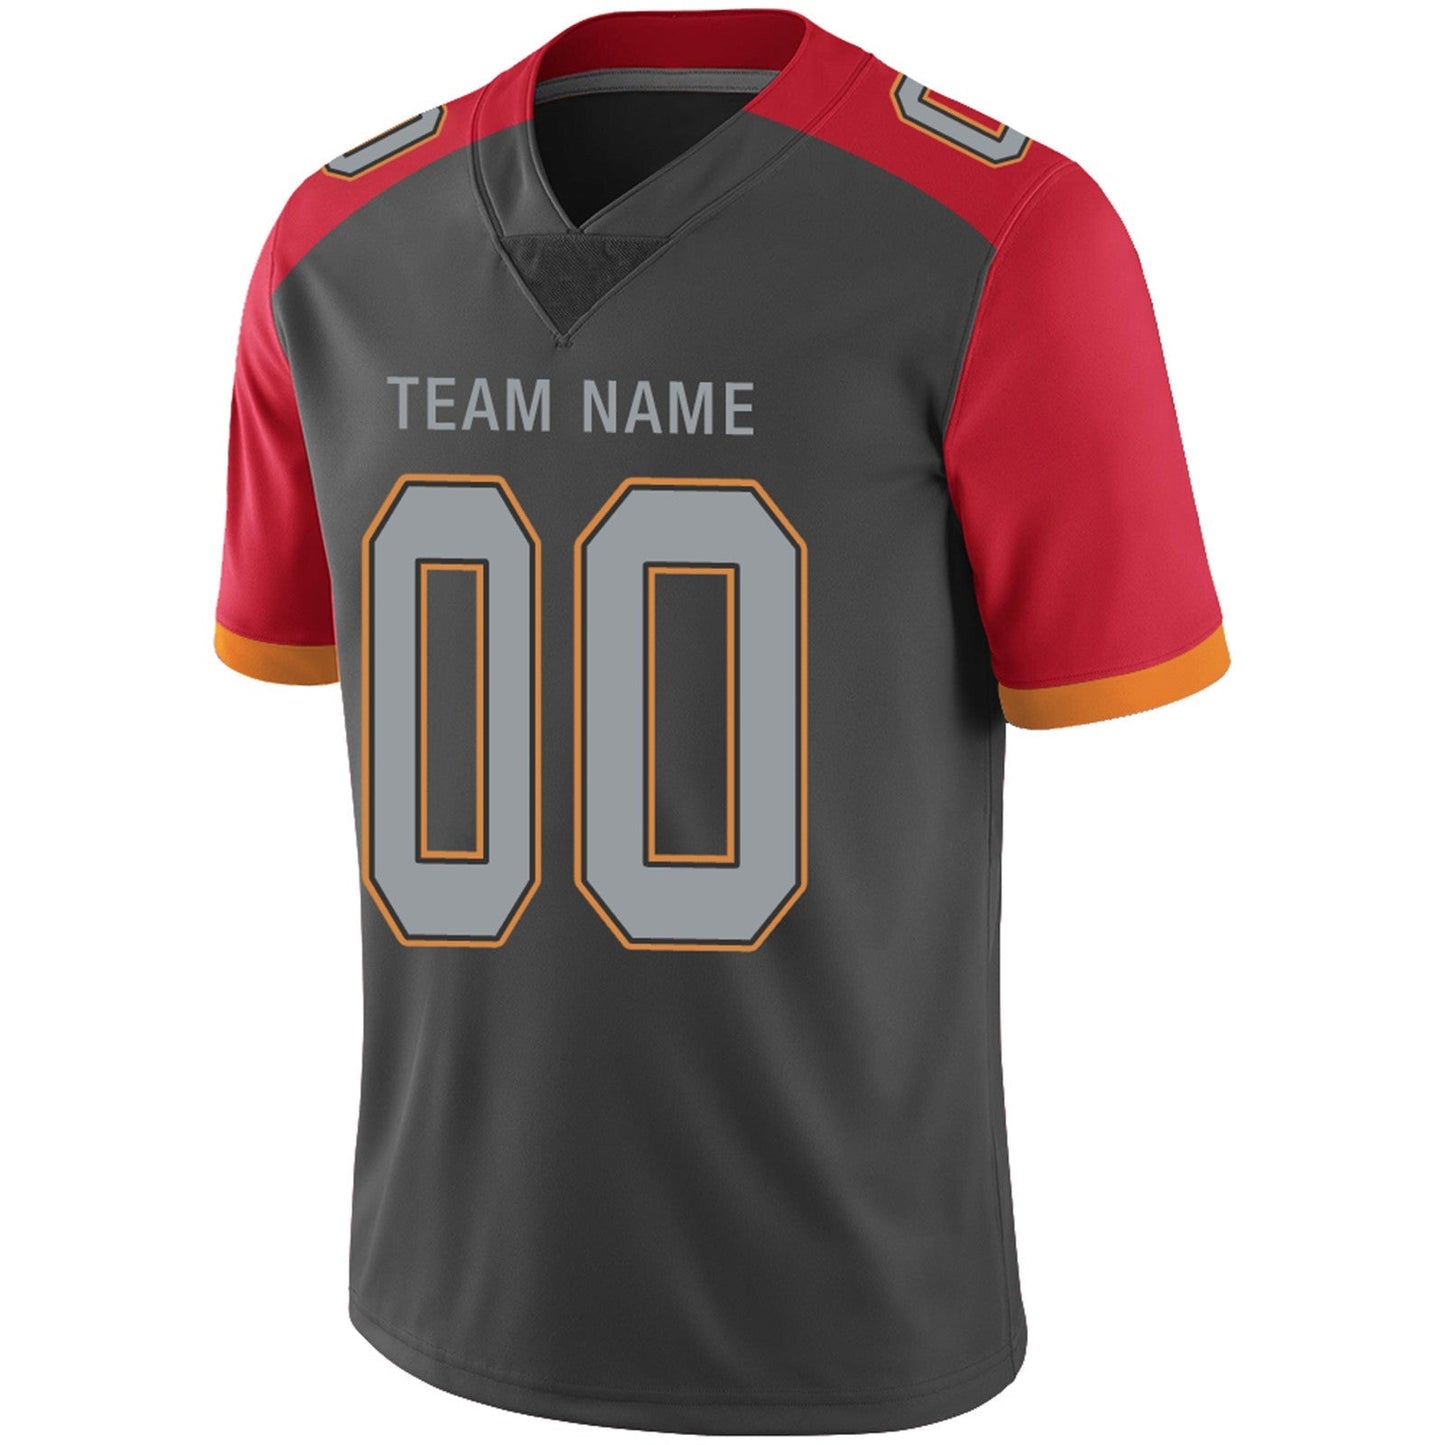 Custom TB.Buccaneers Football Jerseys Team Player or Personalized Design Your Own Name for Men's Women's Youth Jerseys Red